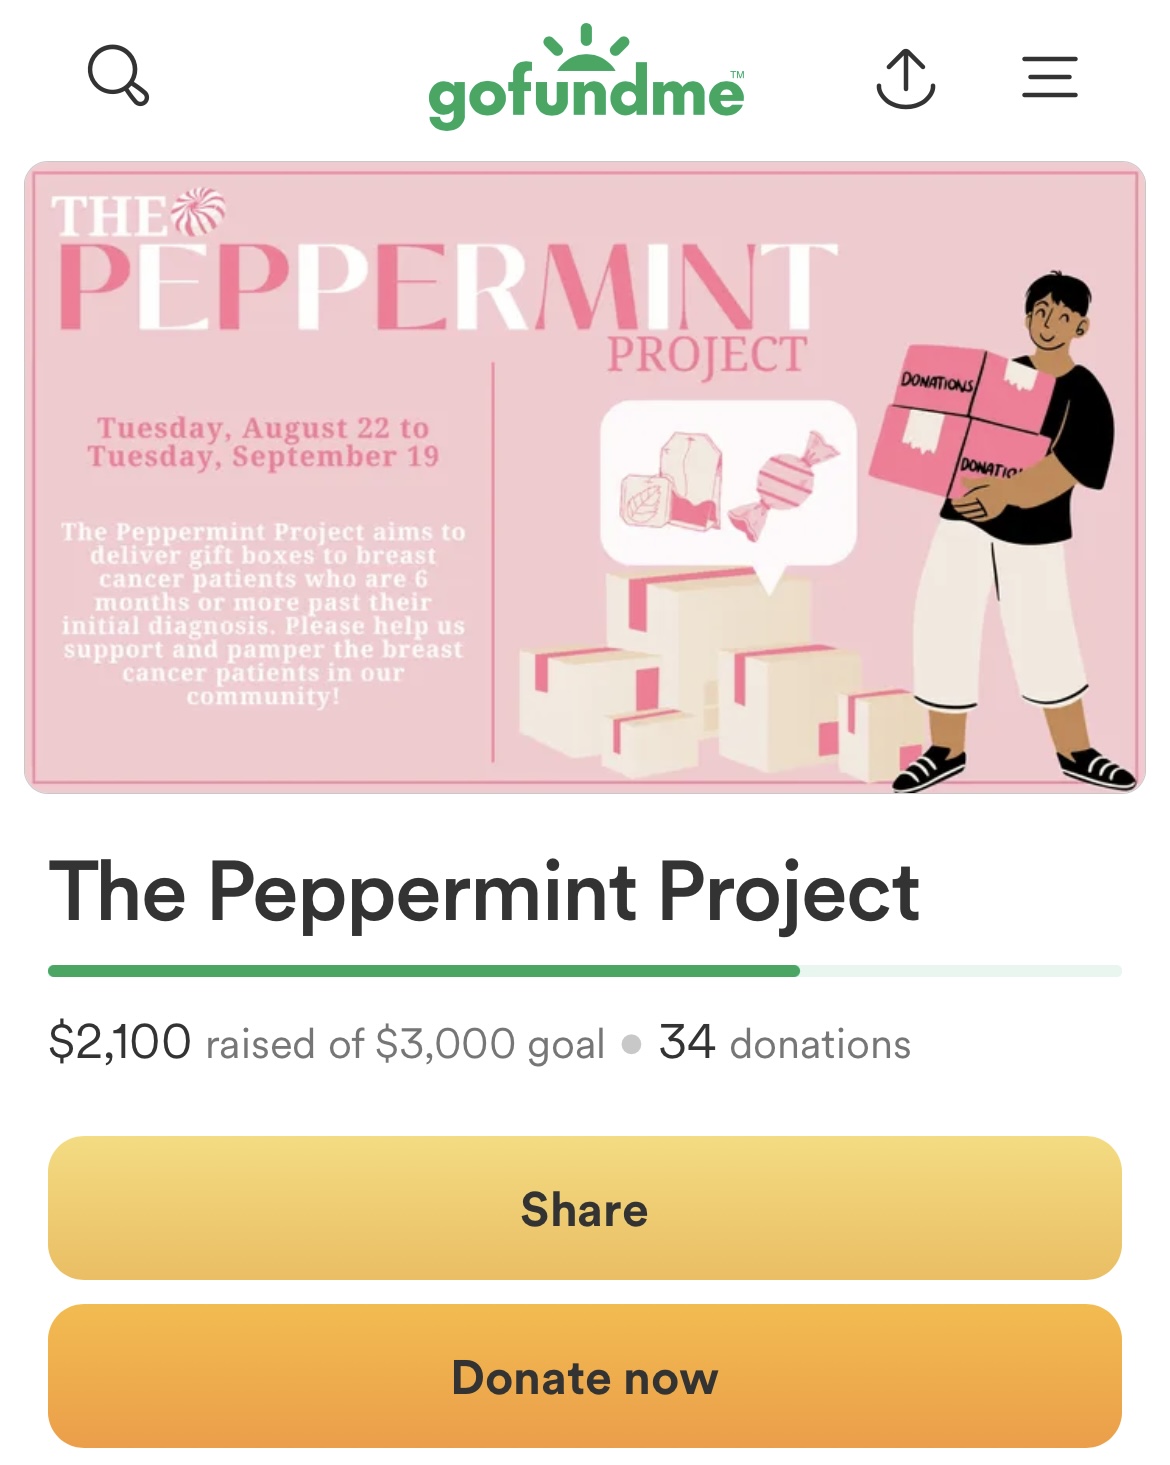 The Peppermint Project is accepting donations via Go Fund Me to support their mission of supporting breast cancer patients. 